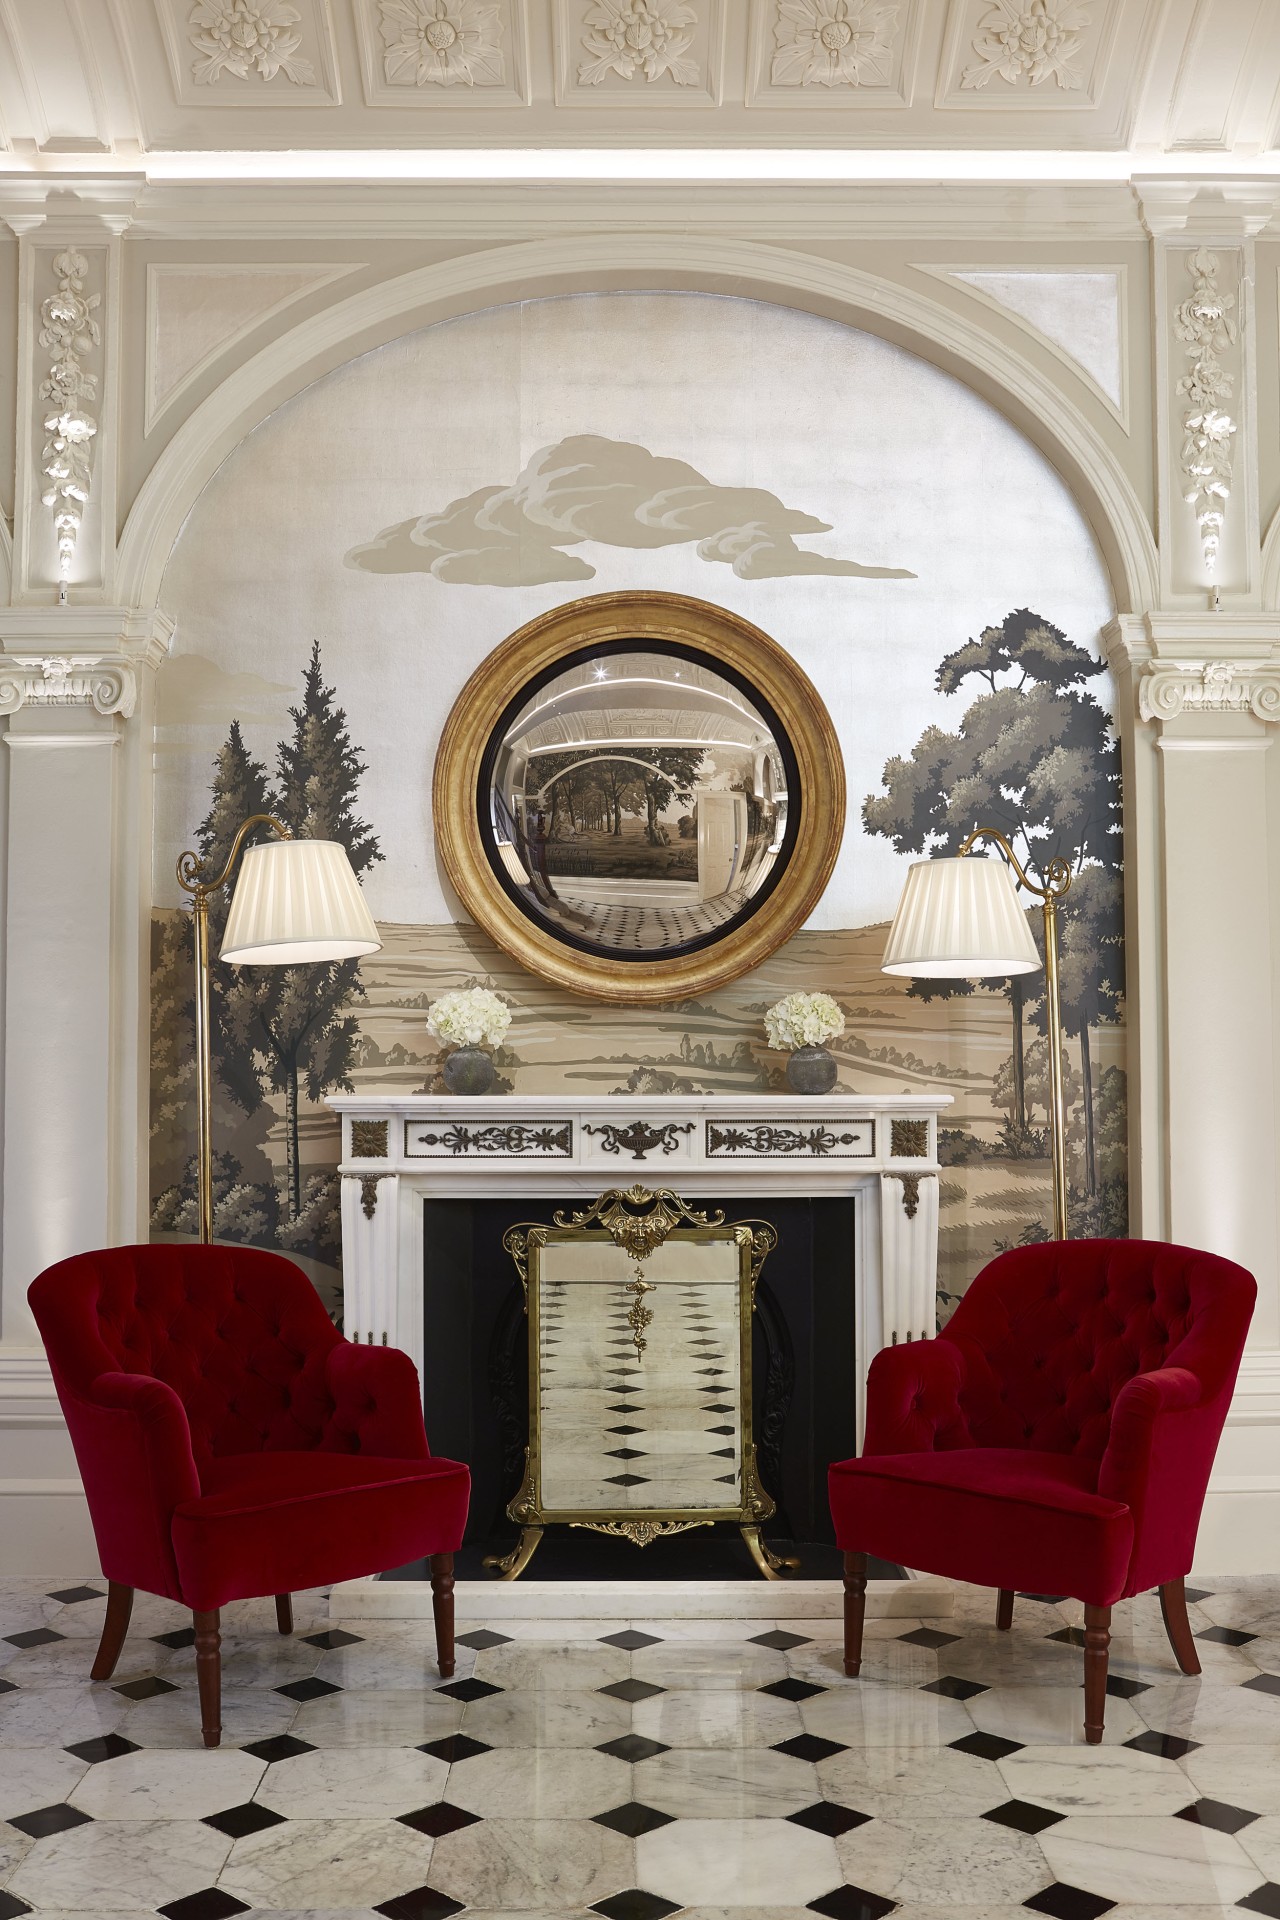 The Goring_refurbished Front Hall_Fireplace_March 2015_Med res